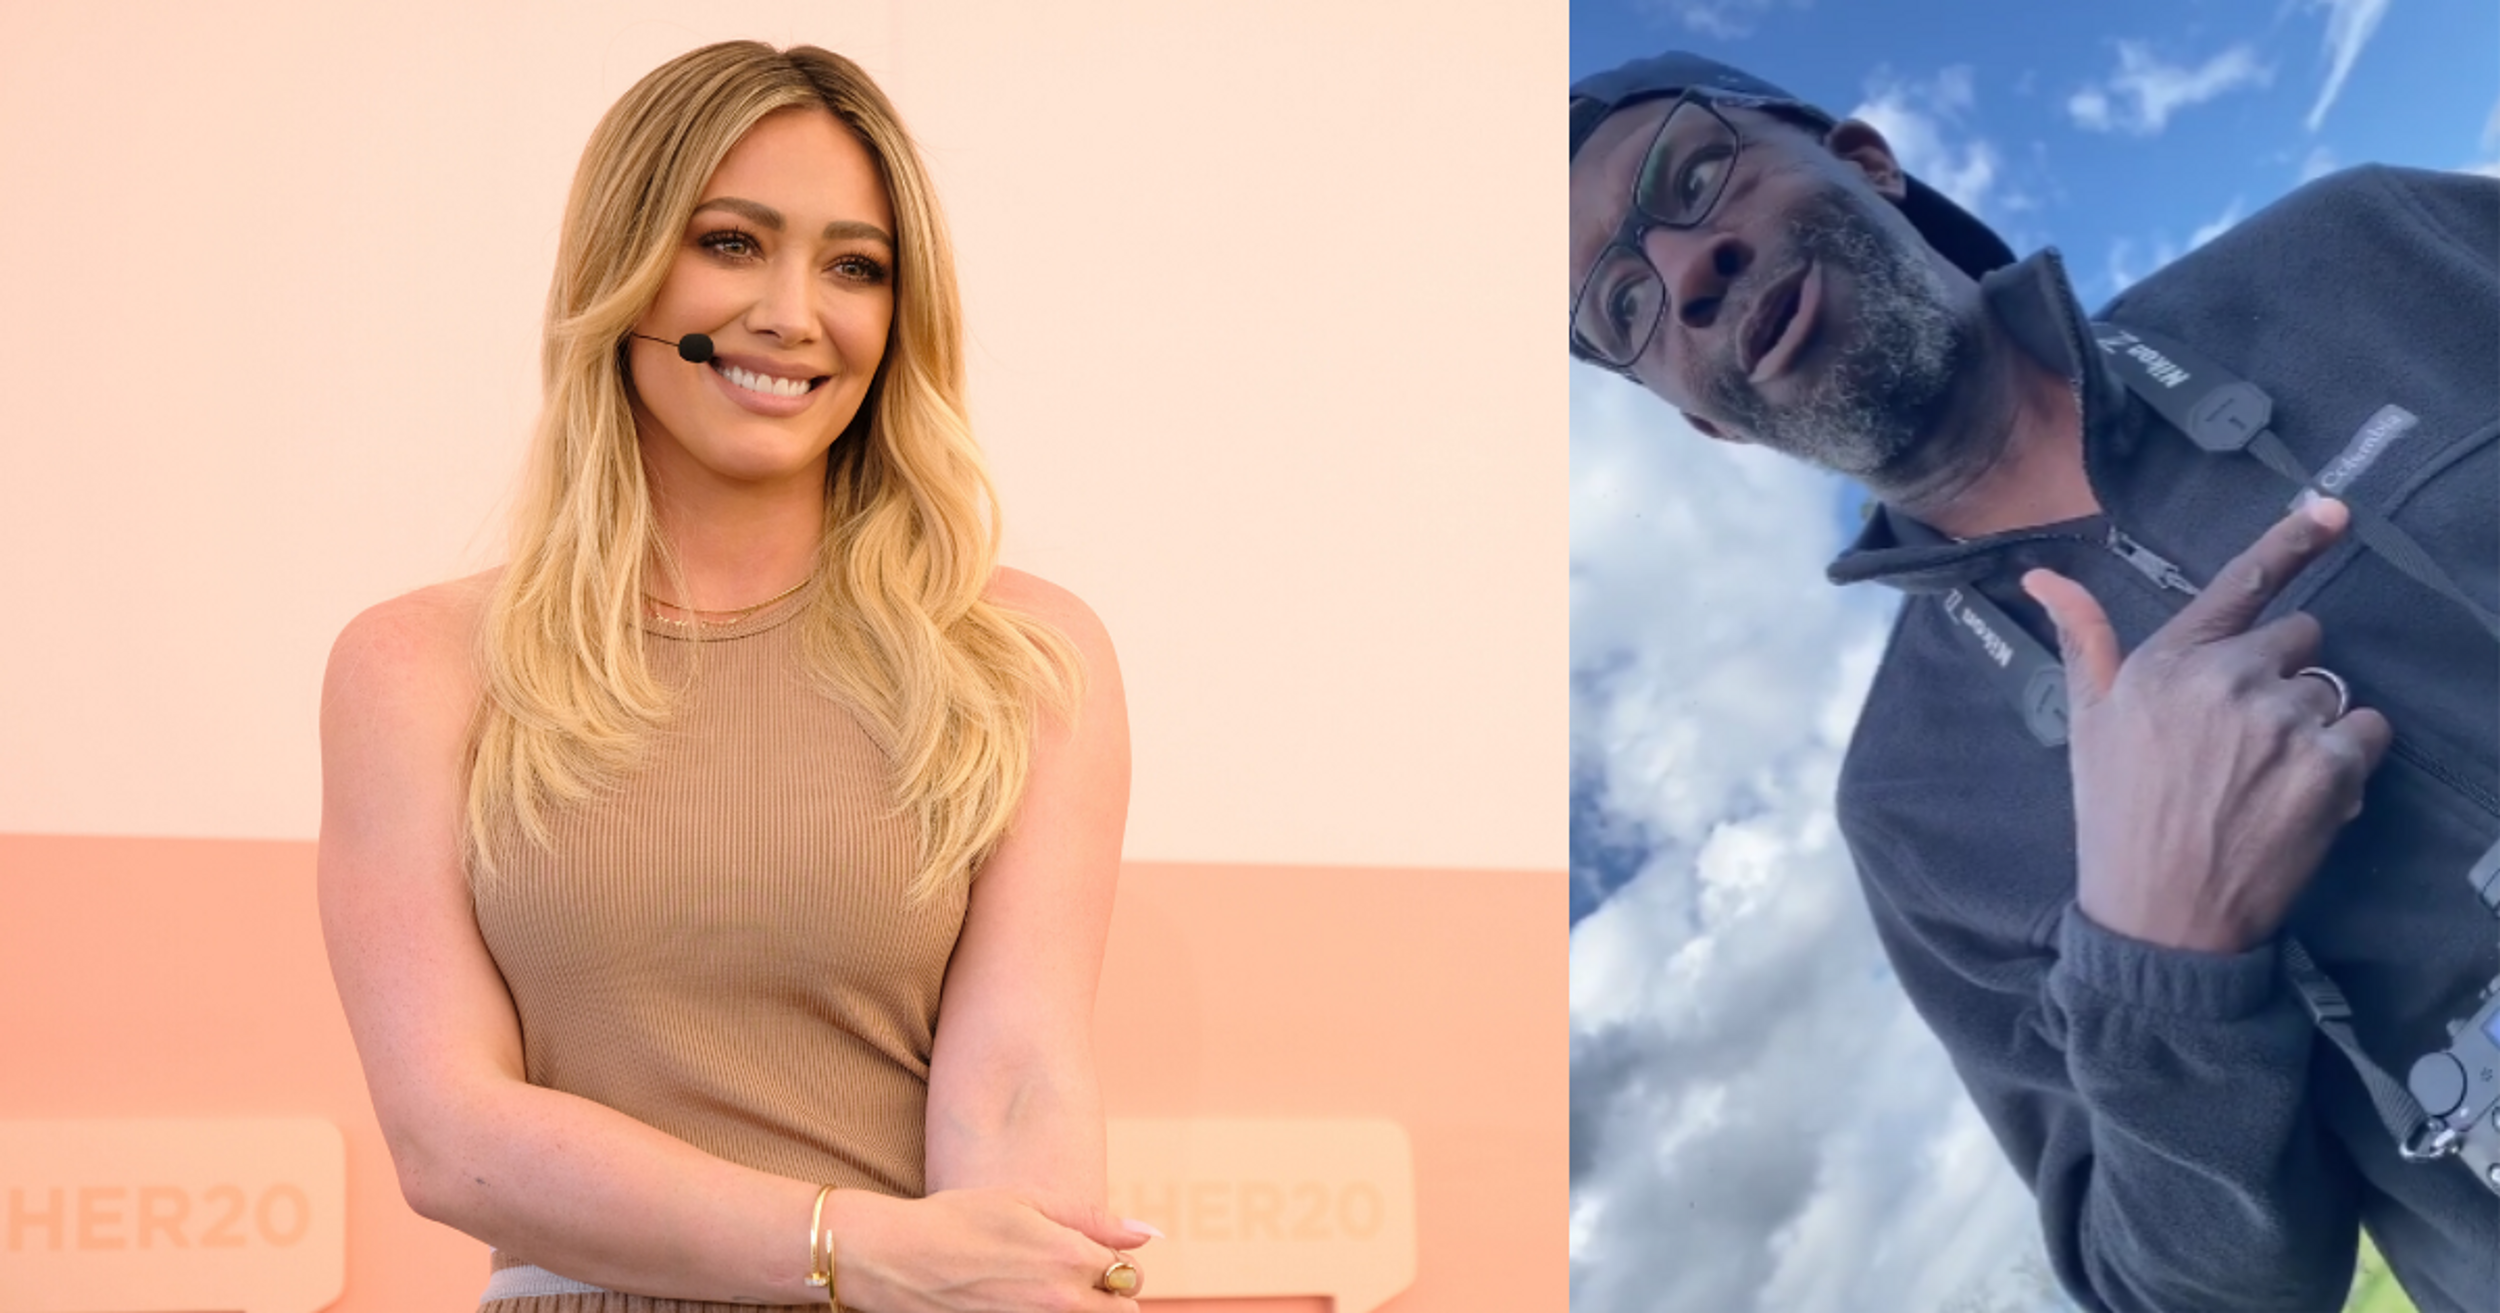 Hilary Duff Confronts Stranger For Taking Photos Of Her 7-Year-Old Son And Other Kids Playing Football